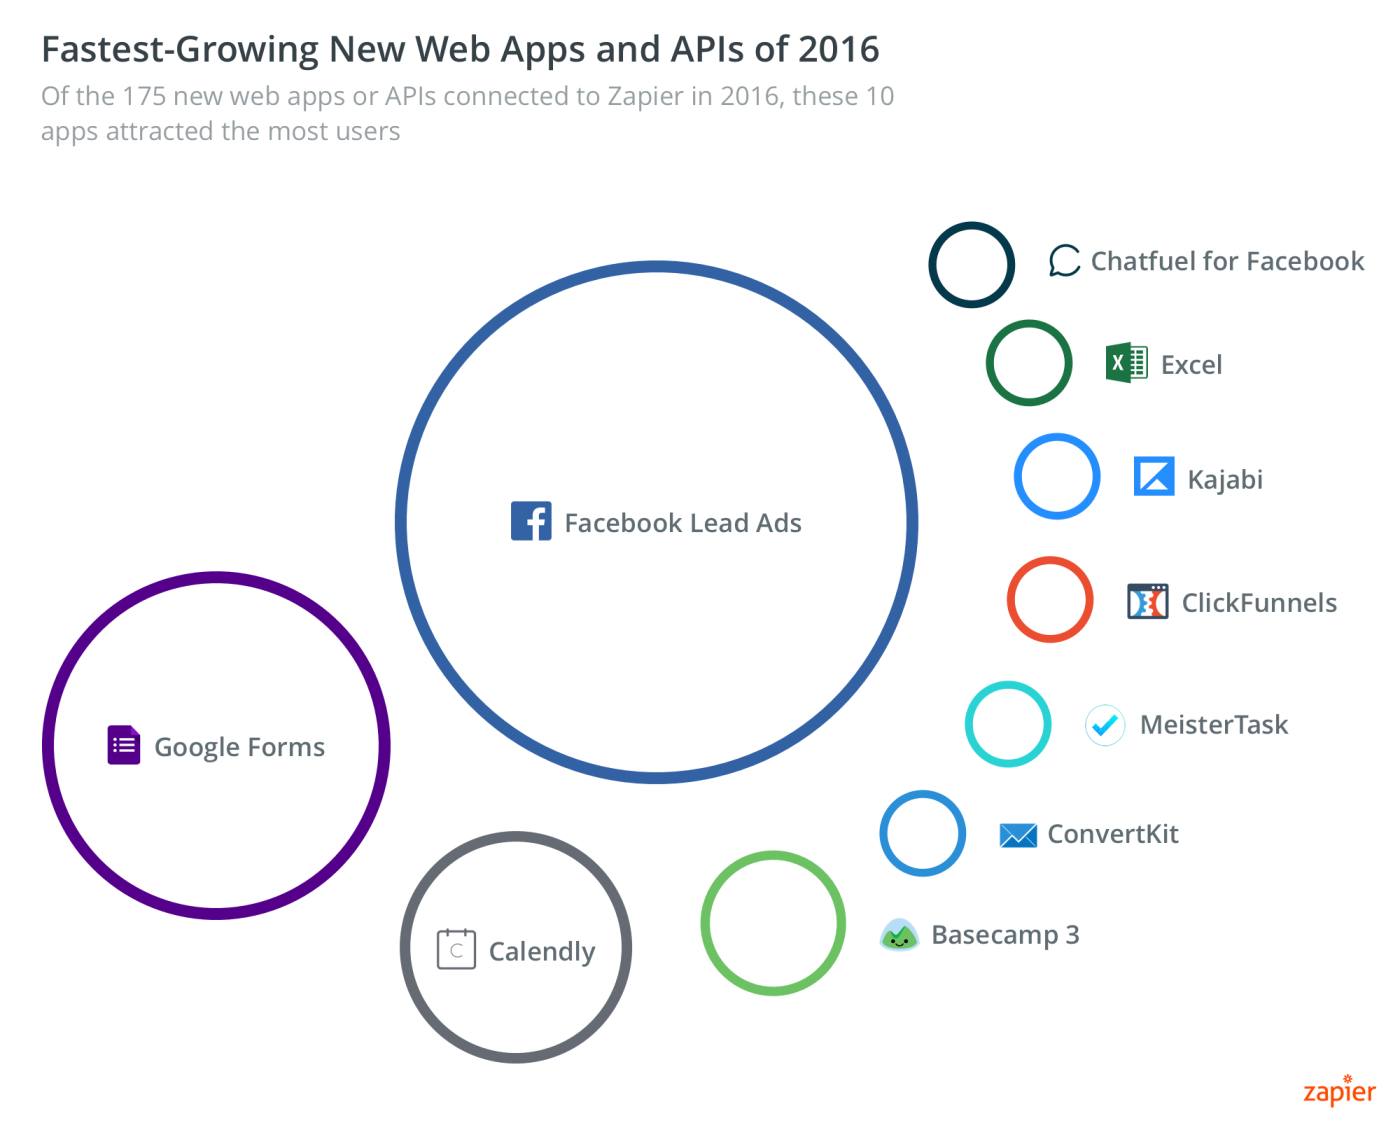 Zapier Fastest Growing new apps 2016